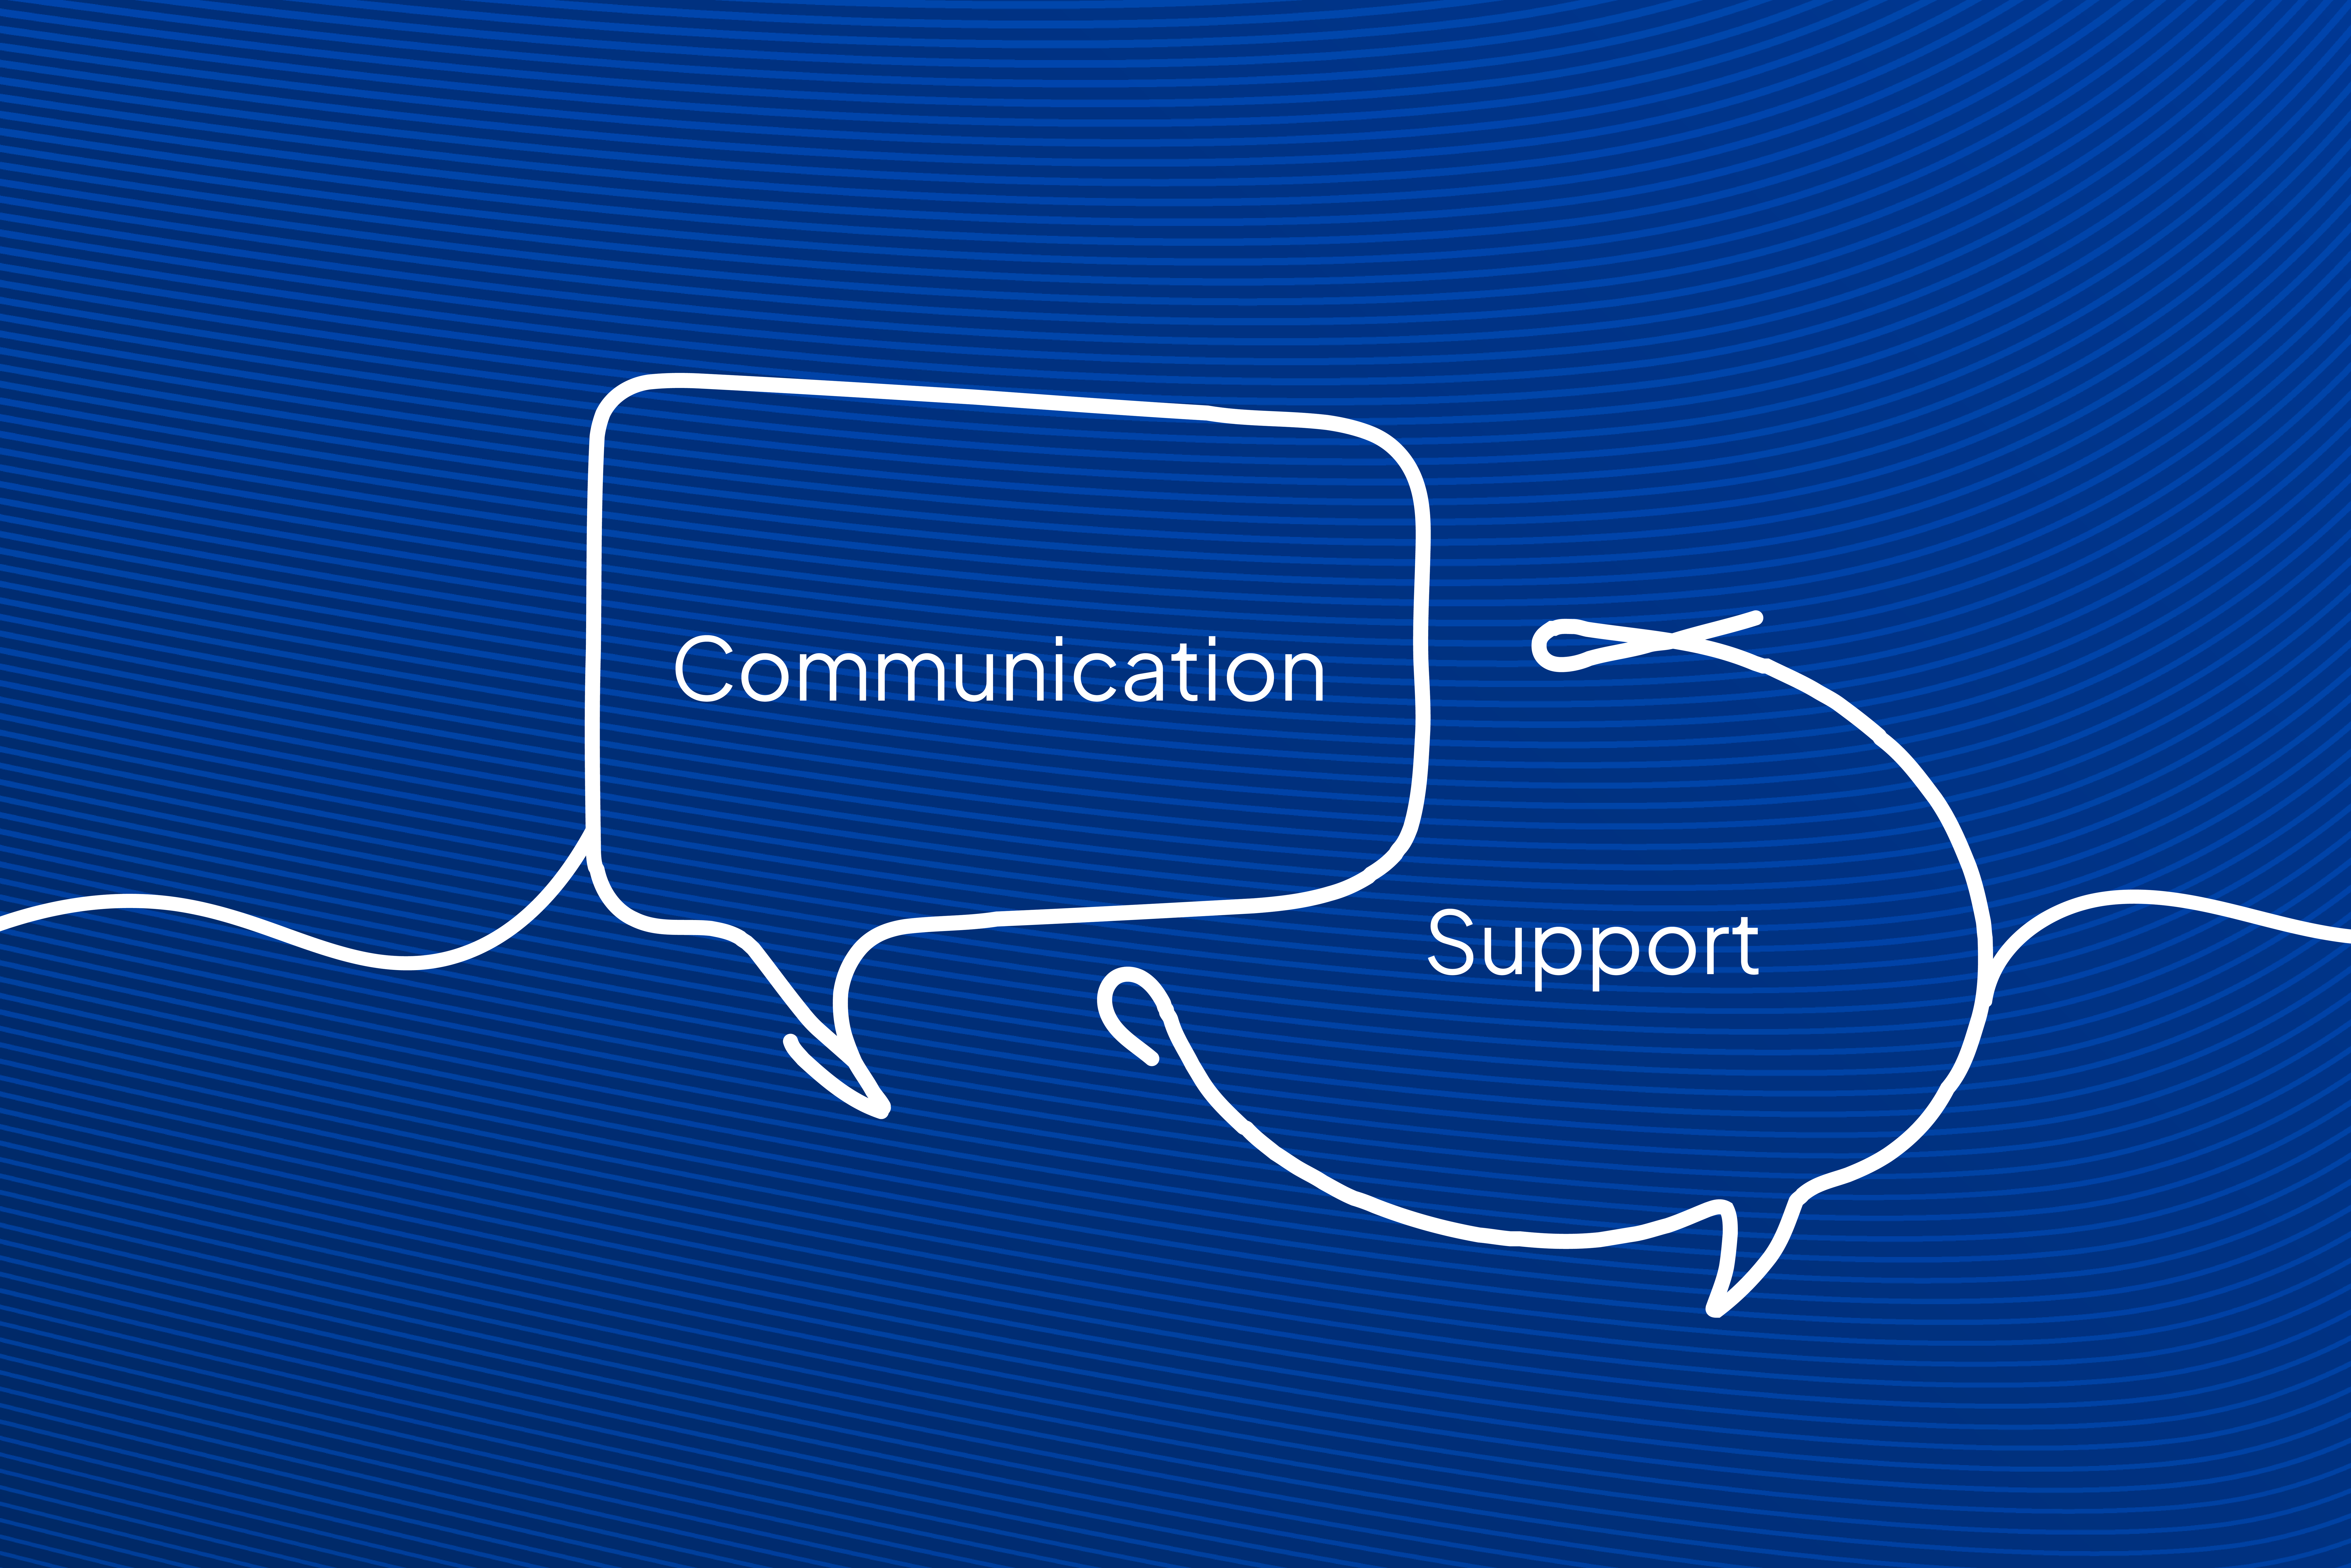 Communication and support image